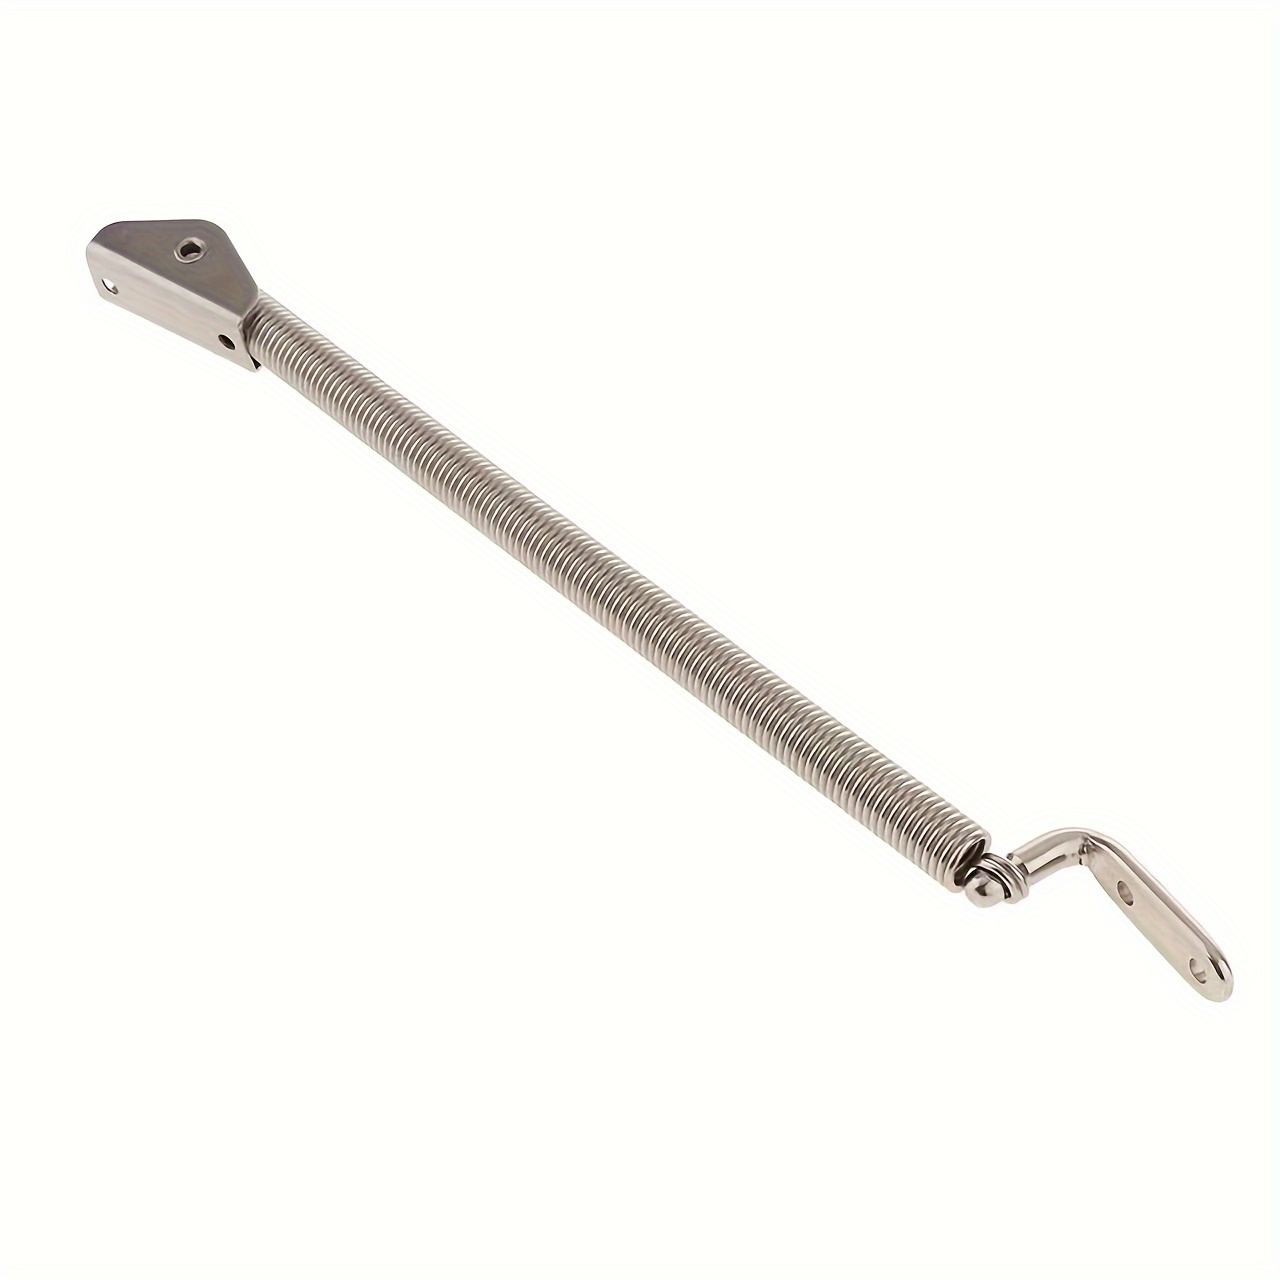 

1pc, Stainless Steel Hatch Spring, Adjustable Marine Boat Door/window Tension Spring, Corrosion-resistant Hardware Accessory